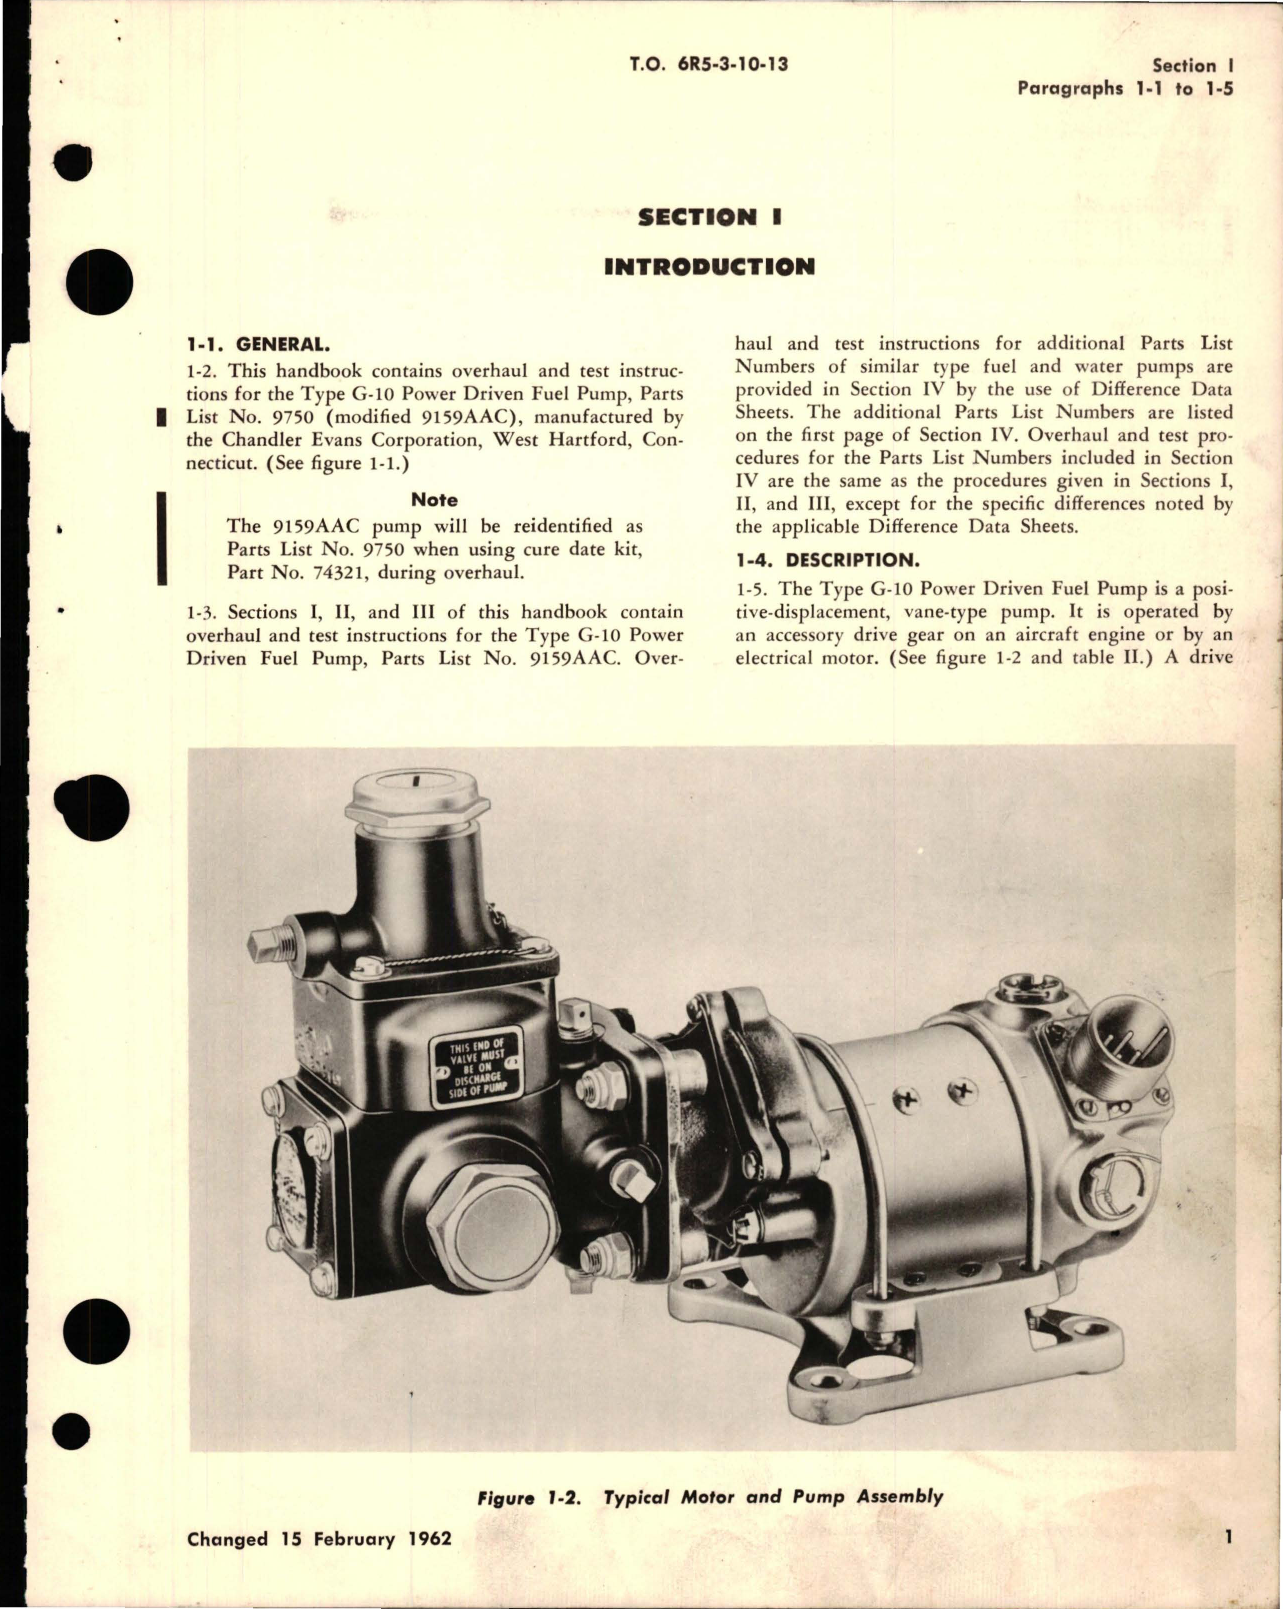 Sample page 5 from AirCorps Library document: Overhaul Instructions for Fuel and Water Pumps - Types A-1, A-2, F-10, G-6, G-9, and G-10